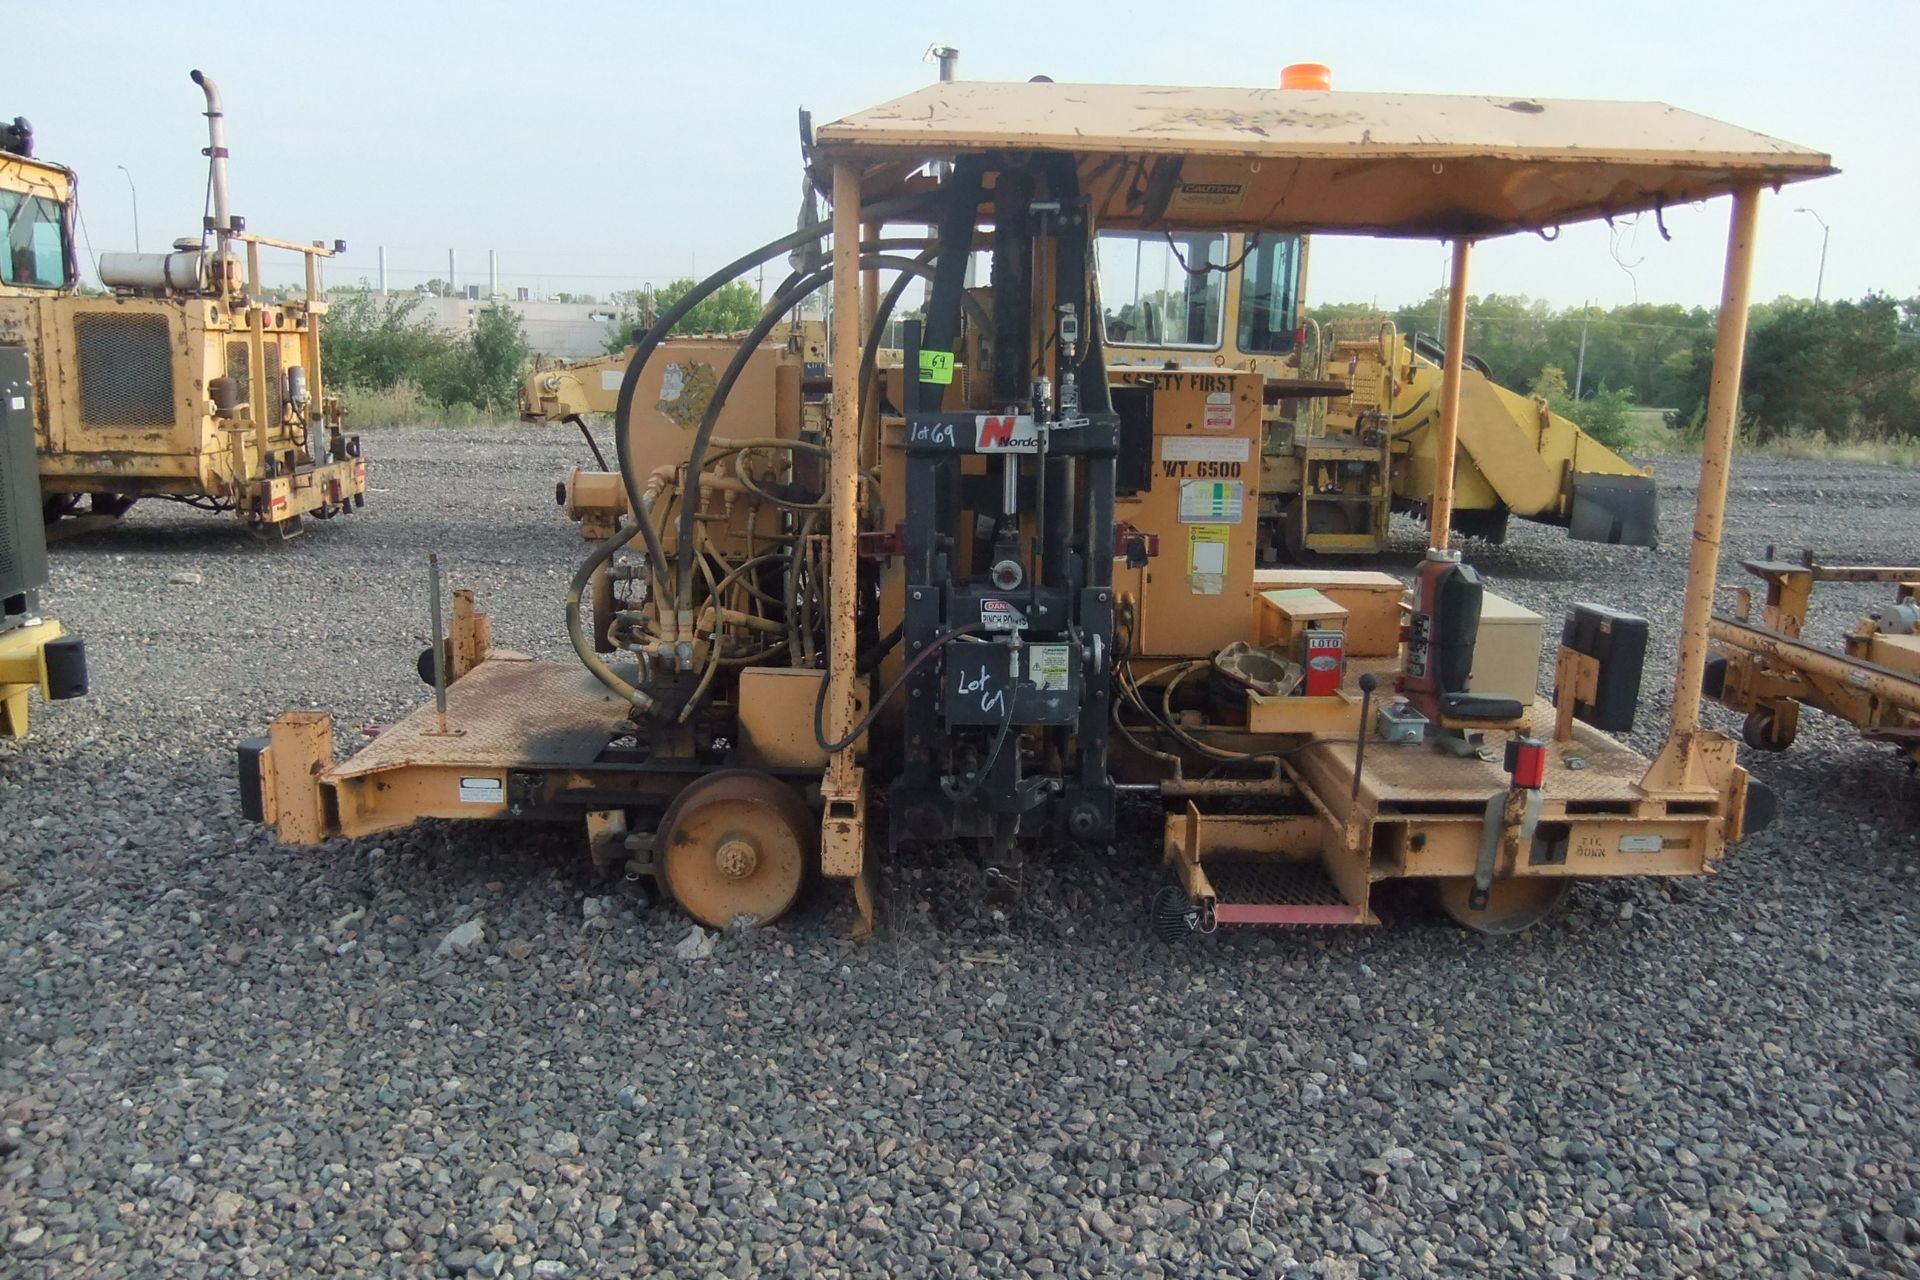 SPD9902; Nordco Superclaw SLS Spike Puller - Dual (Left); Model #: SLS; S/N: 478; Hours: 1498